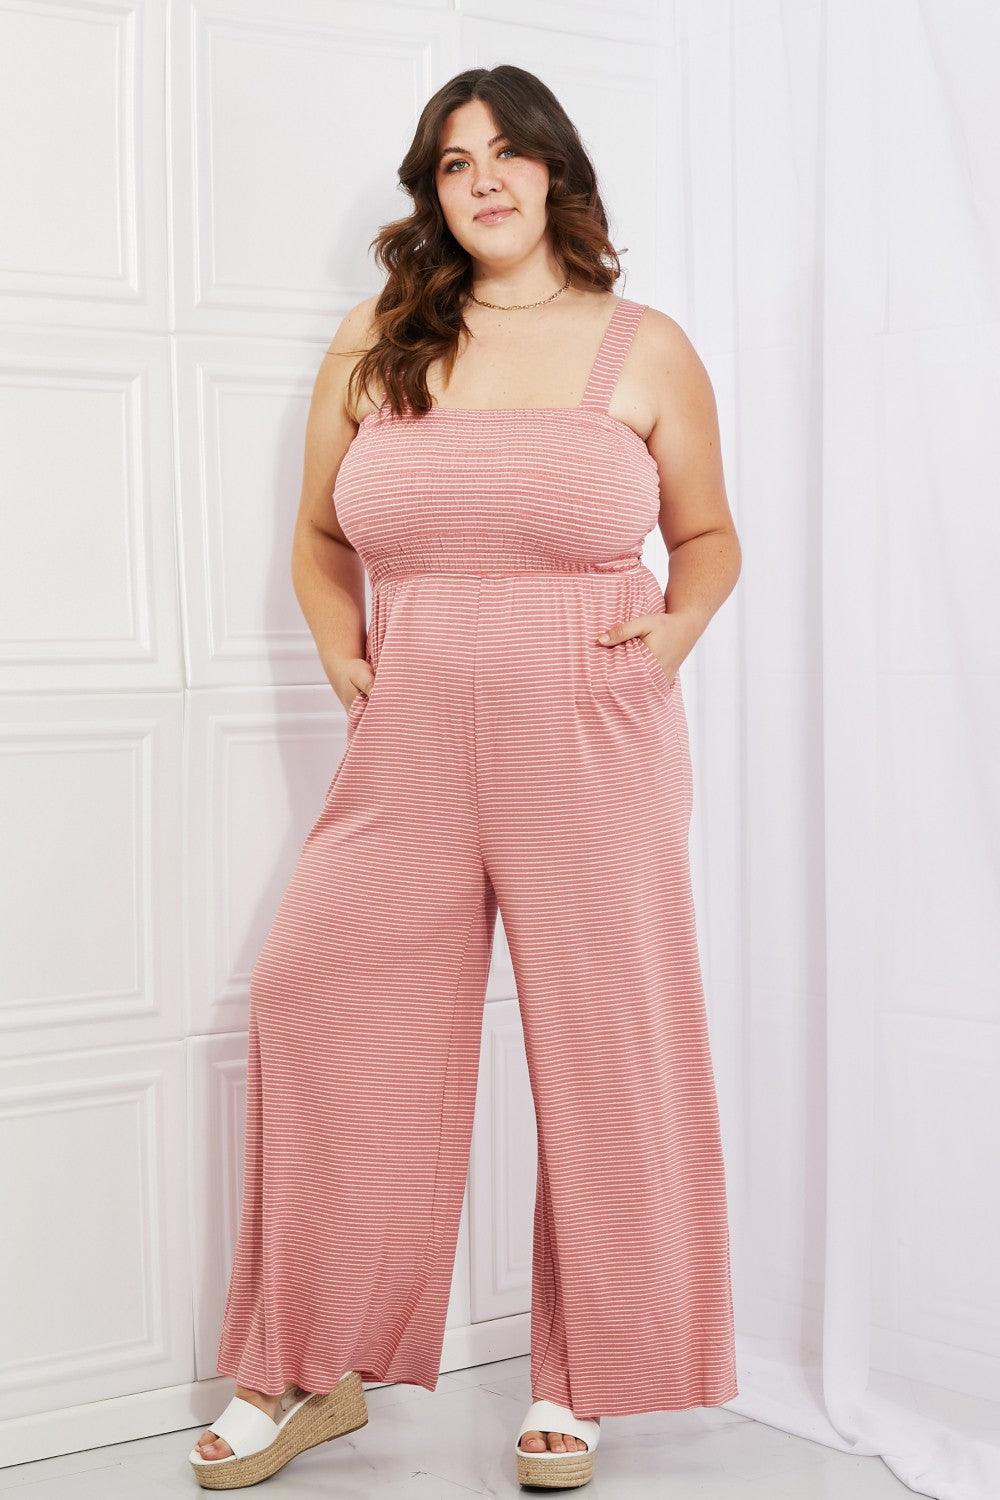 Only Exception Striped Jumpsuit - Wildflower Hippies